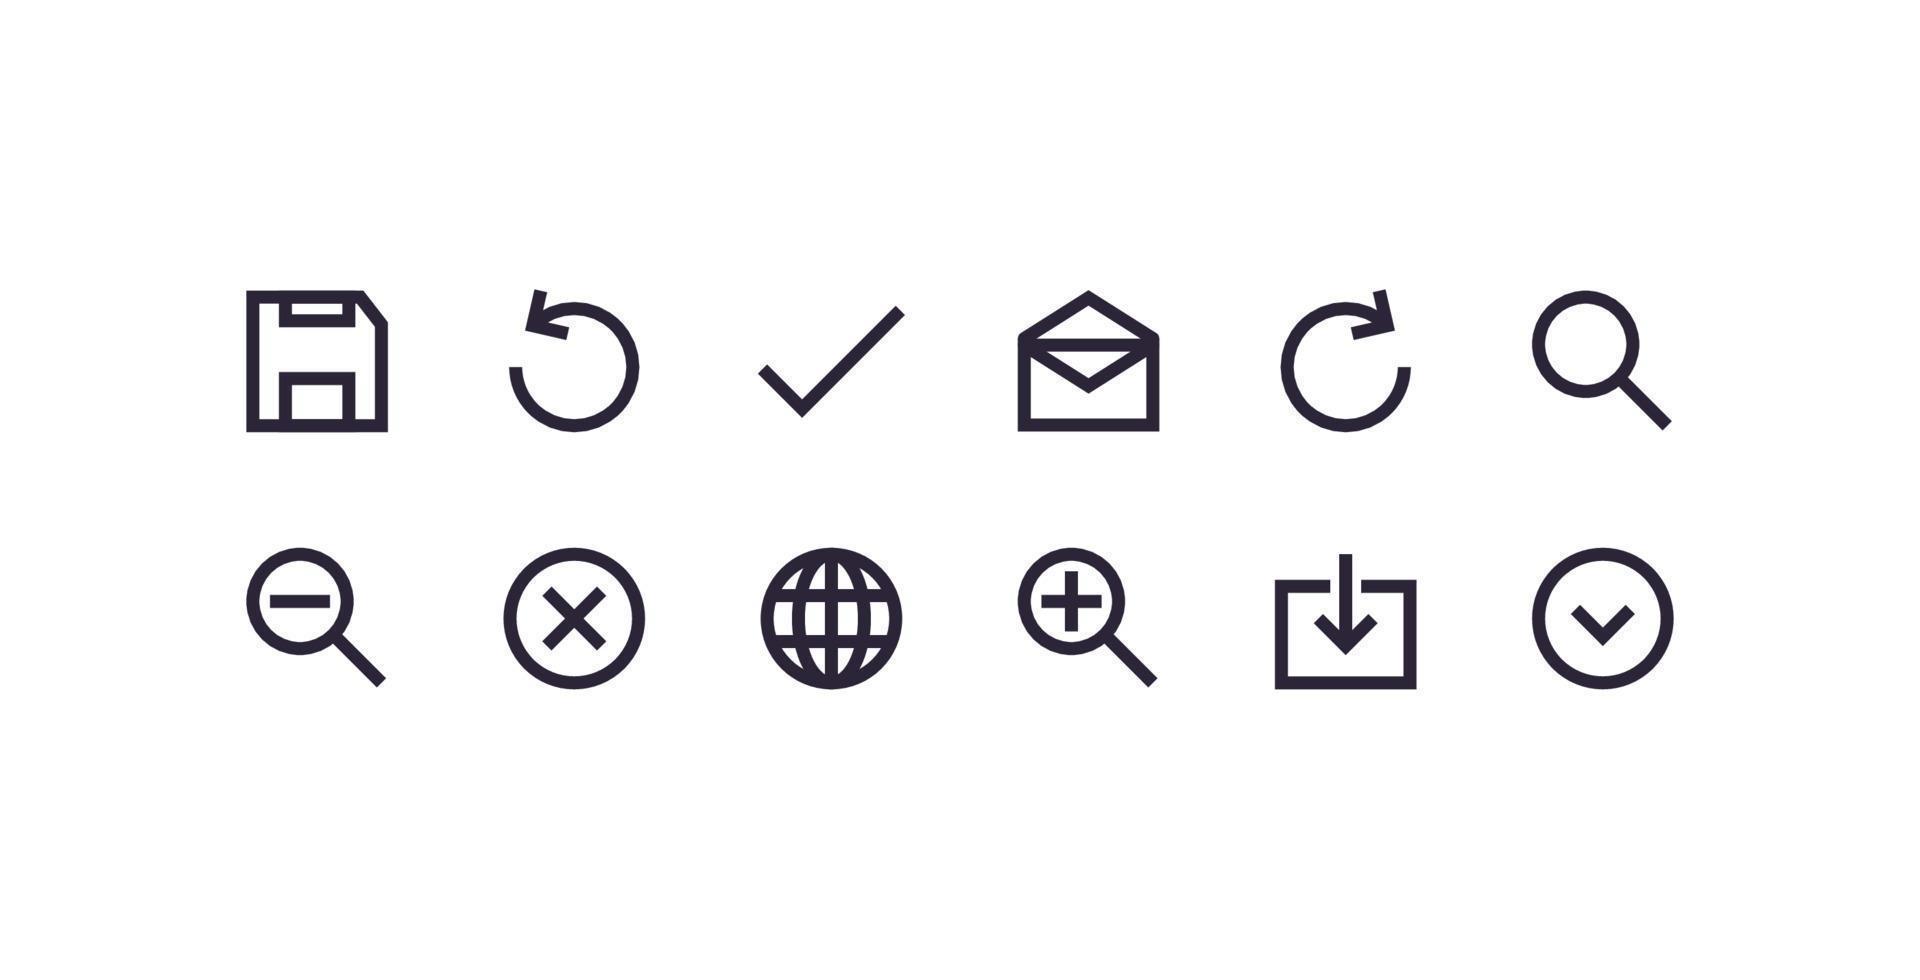 Mobile user interface navigation and simple app icons flat vector illustration.